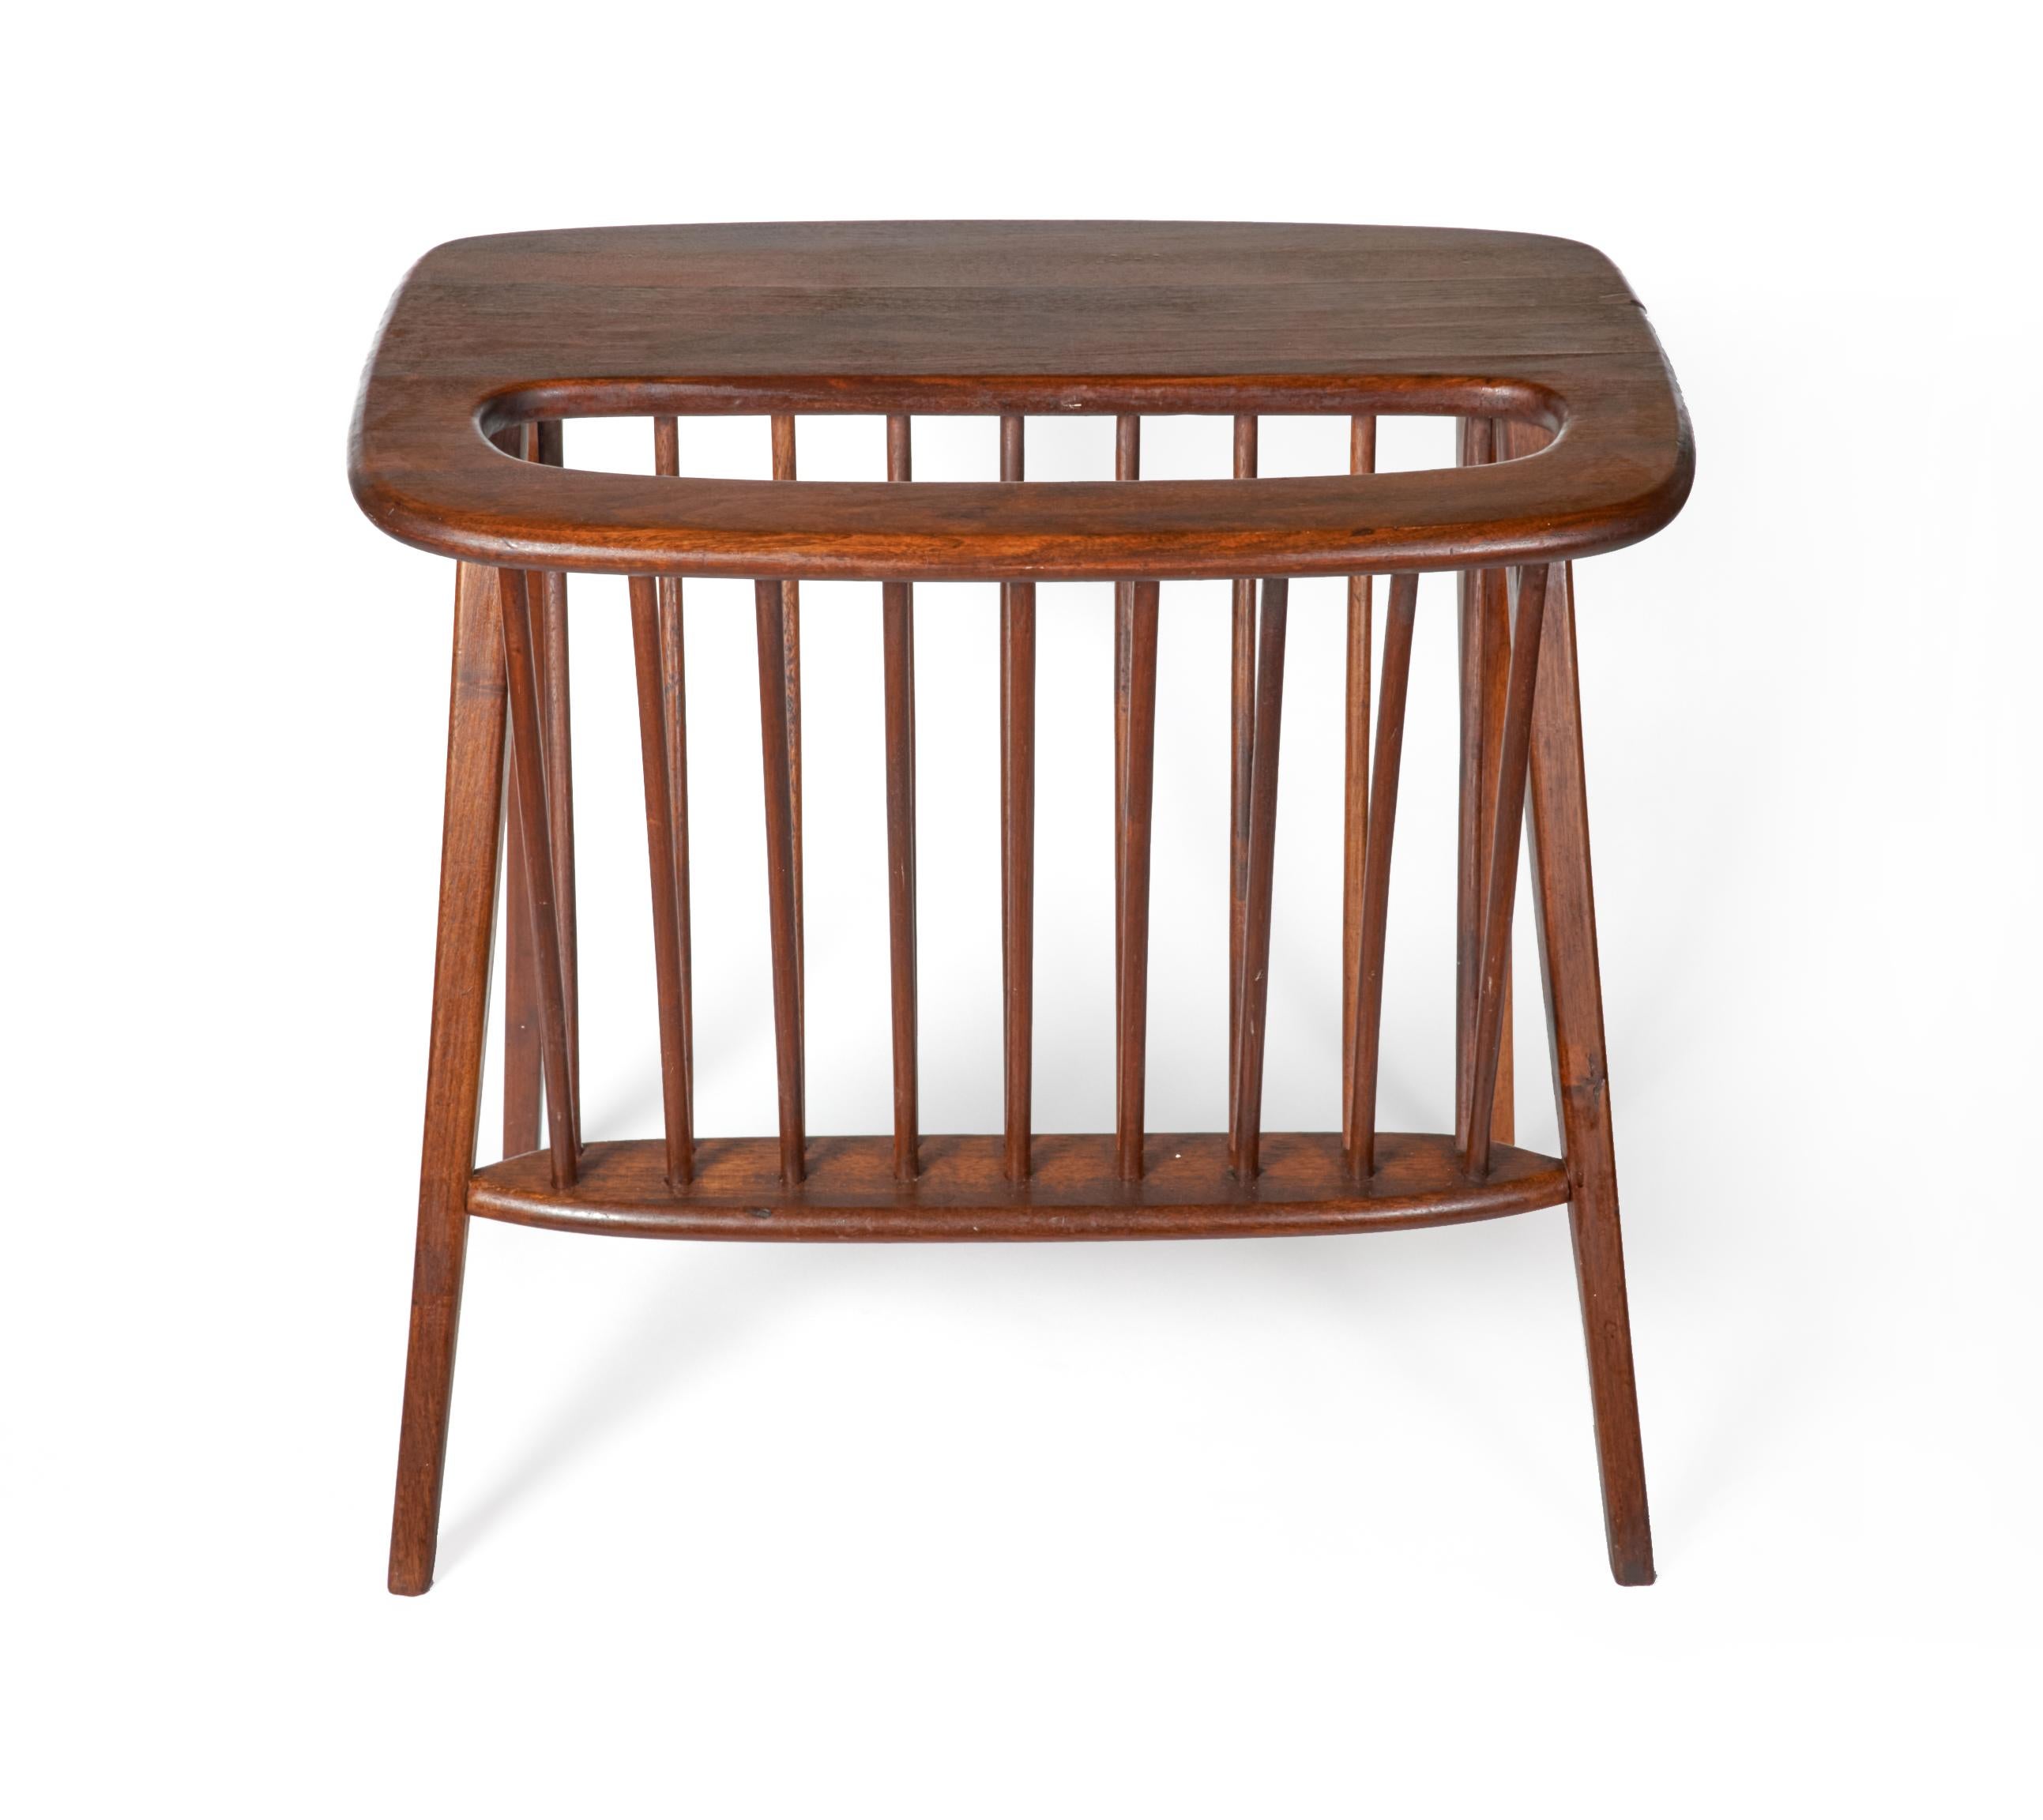 Stylish Mid-Century Modern walnut end table with a built in magazine rack bu designer Arthur Umanoff. Table is in great condition with minimal signs of use.
Umanoff was a graduate of Pratt University in the early 1950s. Around that same time, he